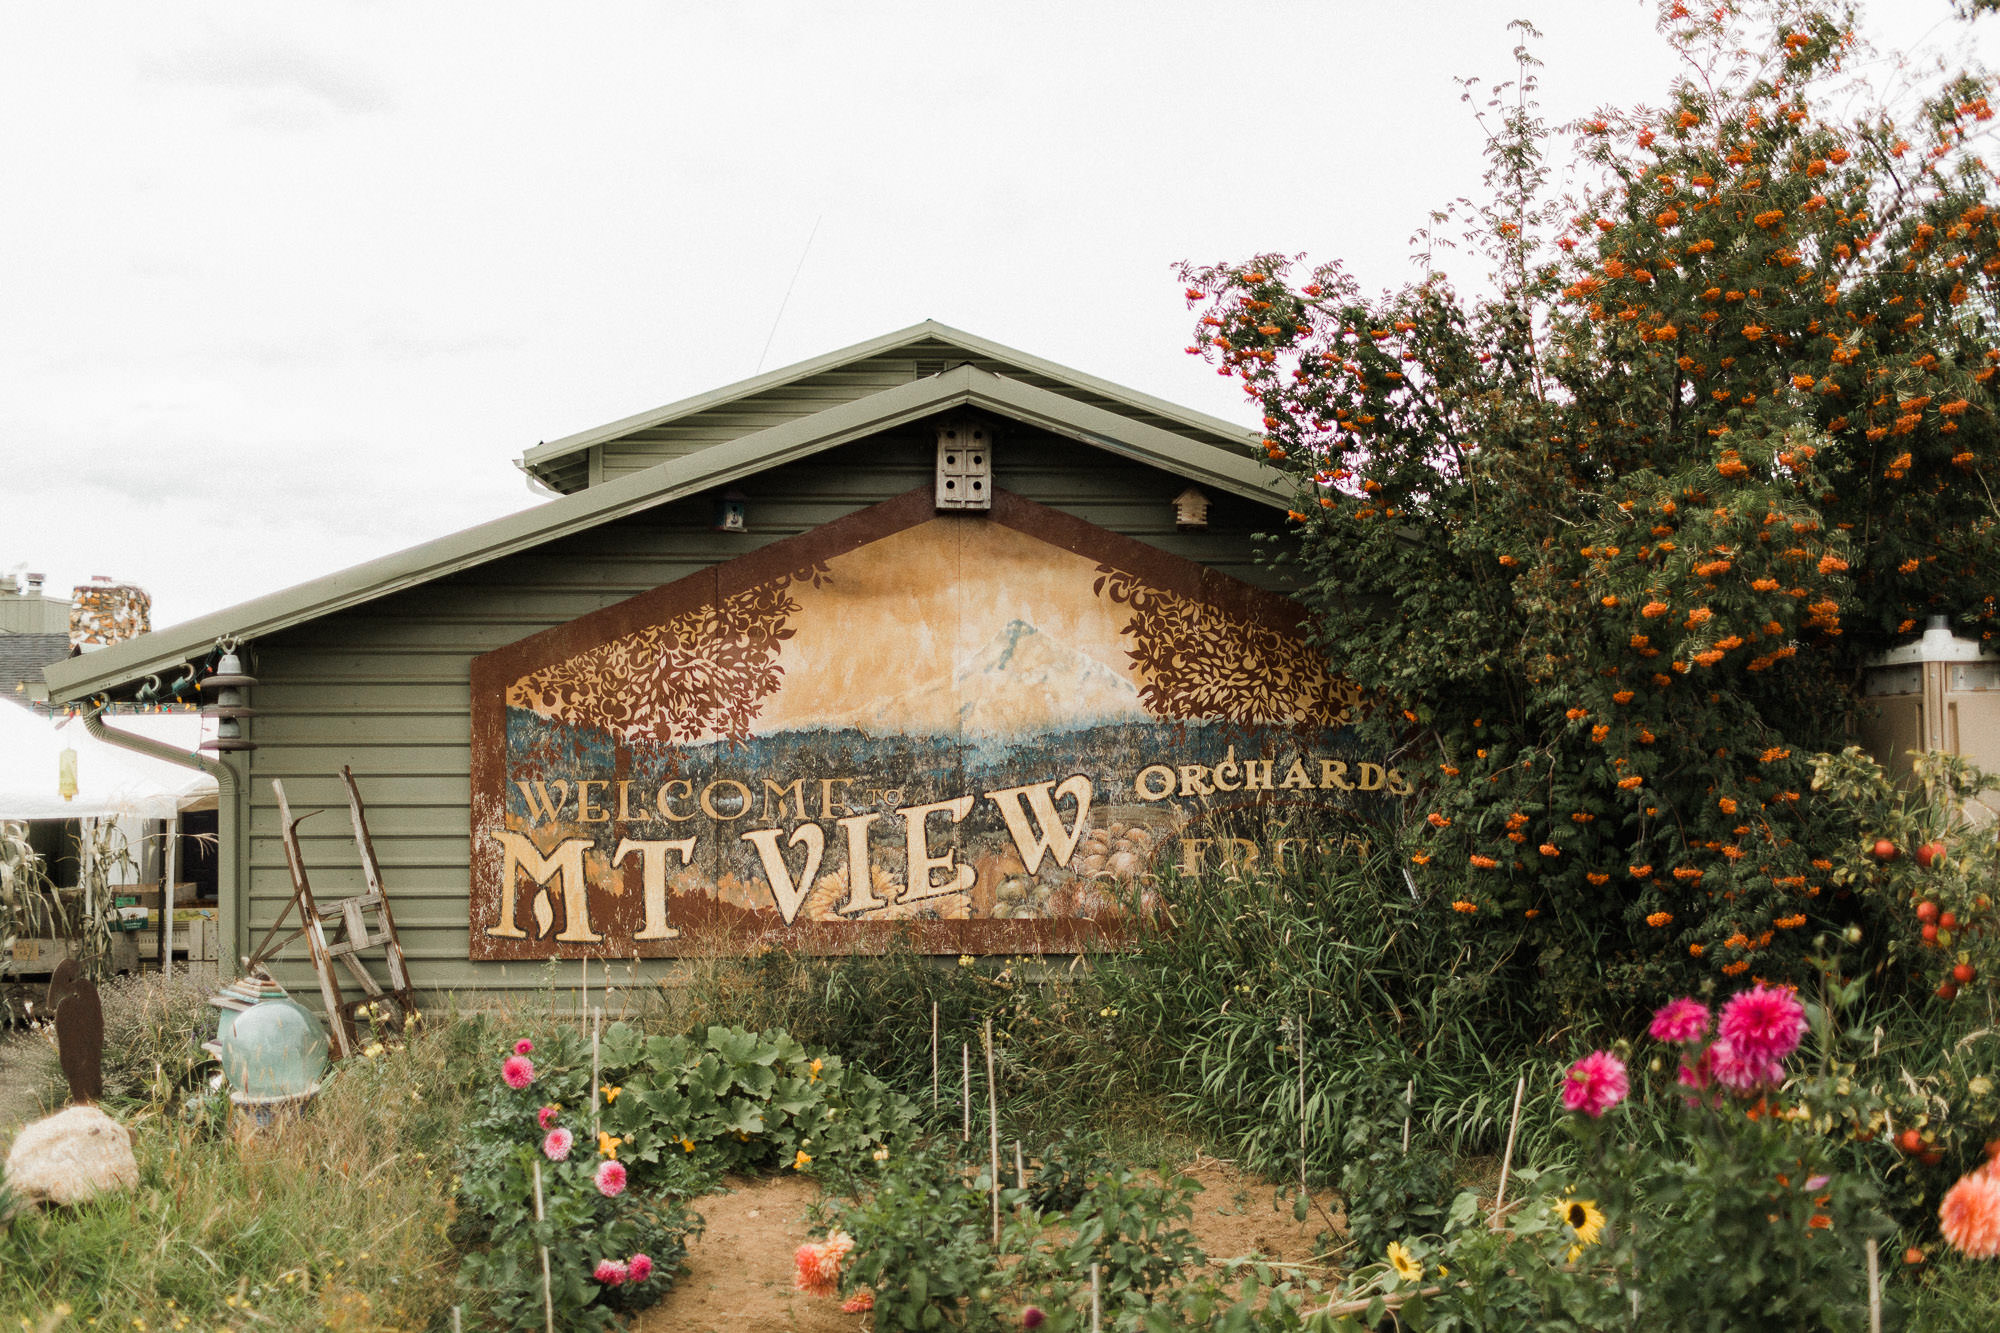 A large sign on the side of a house reads "Welcome to Mt. View Orchards."